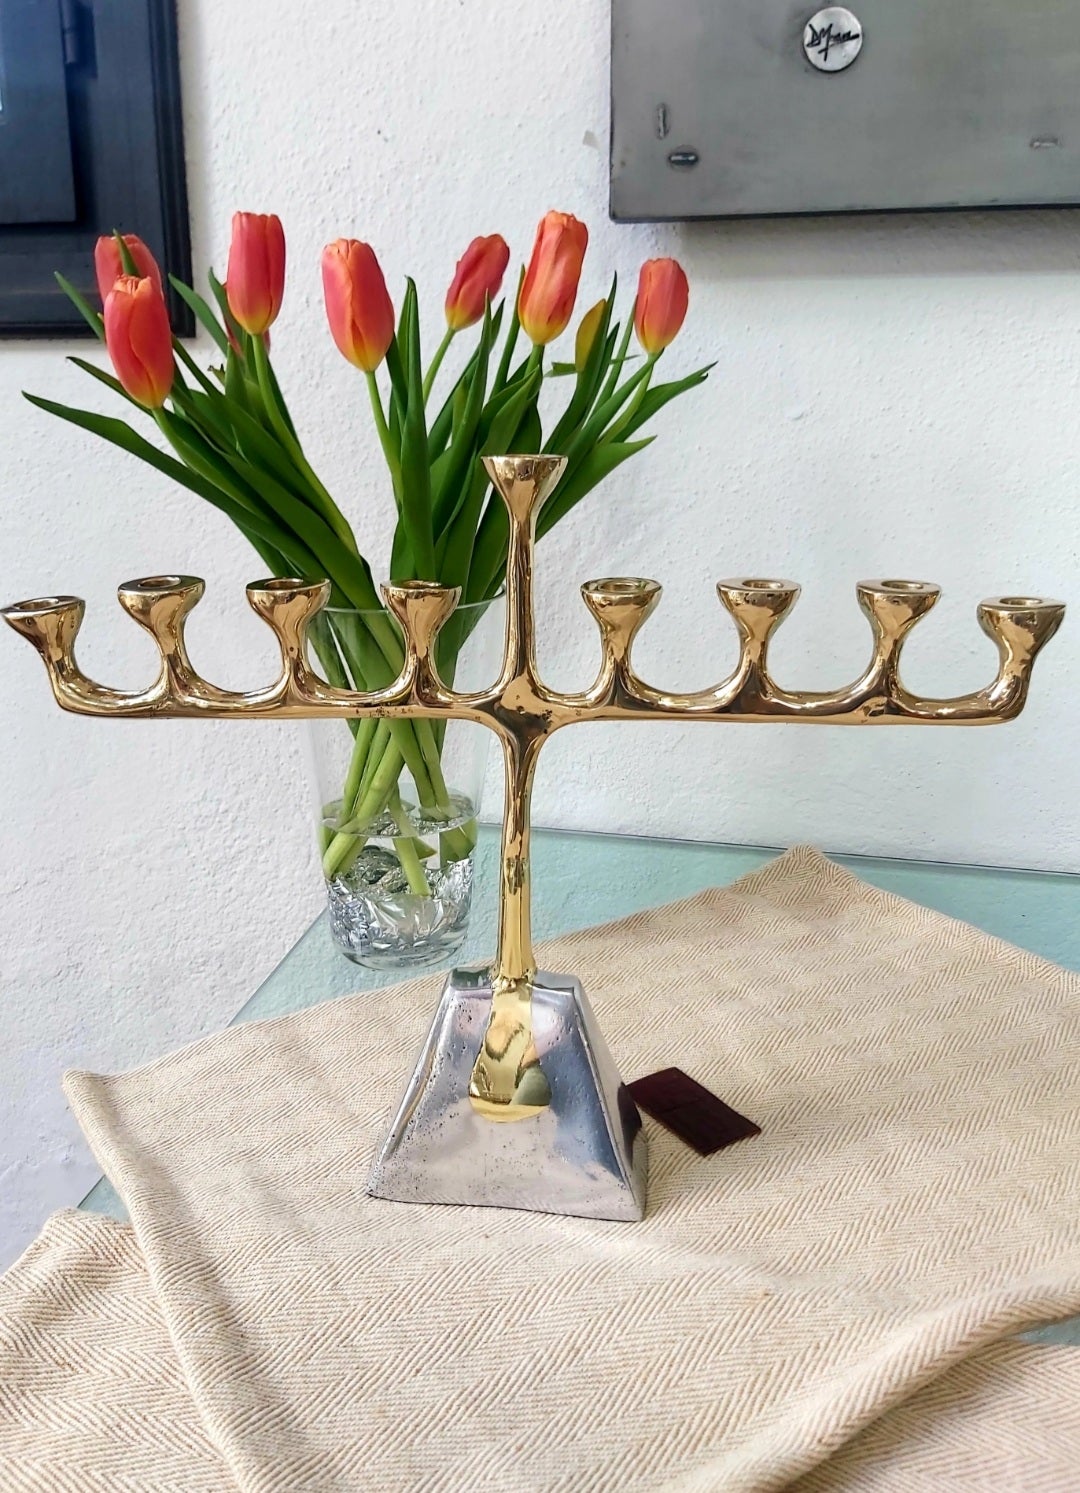 The candelabra was created by David Marshall, from sand cast aluminium and brass.
 We use recycled materials all our pieces are handmade, mounted and finished in our foundry and workshop in Spain.
It is certified authentic by the Artist David